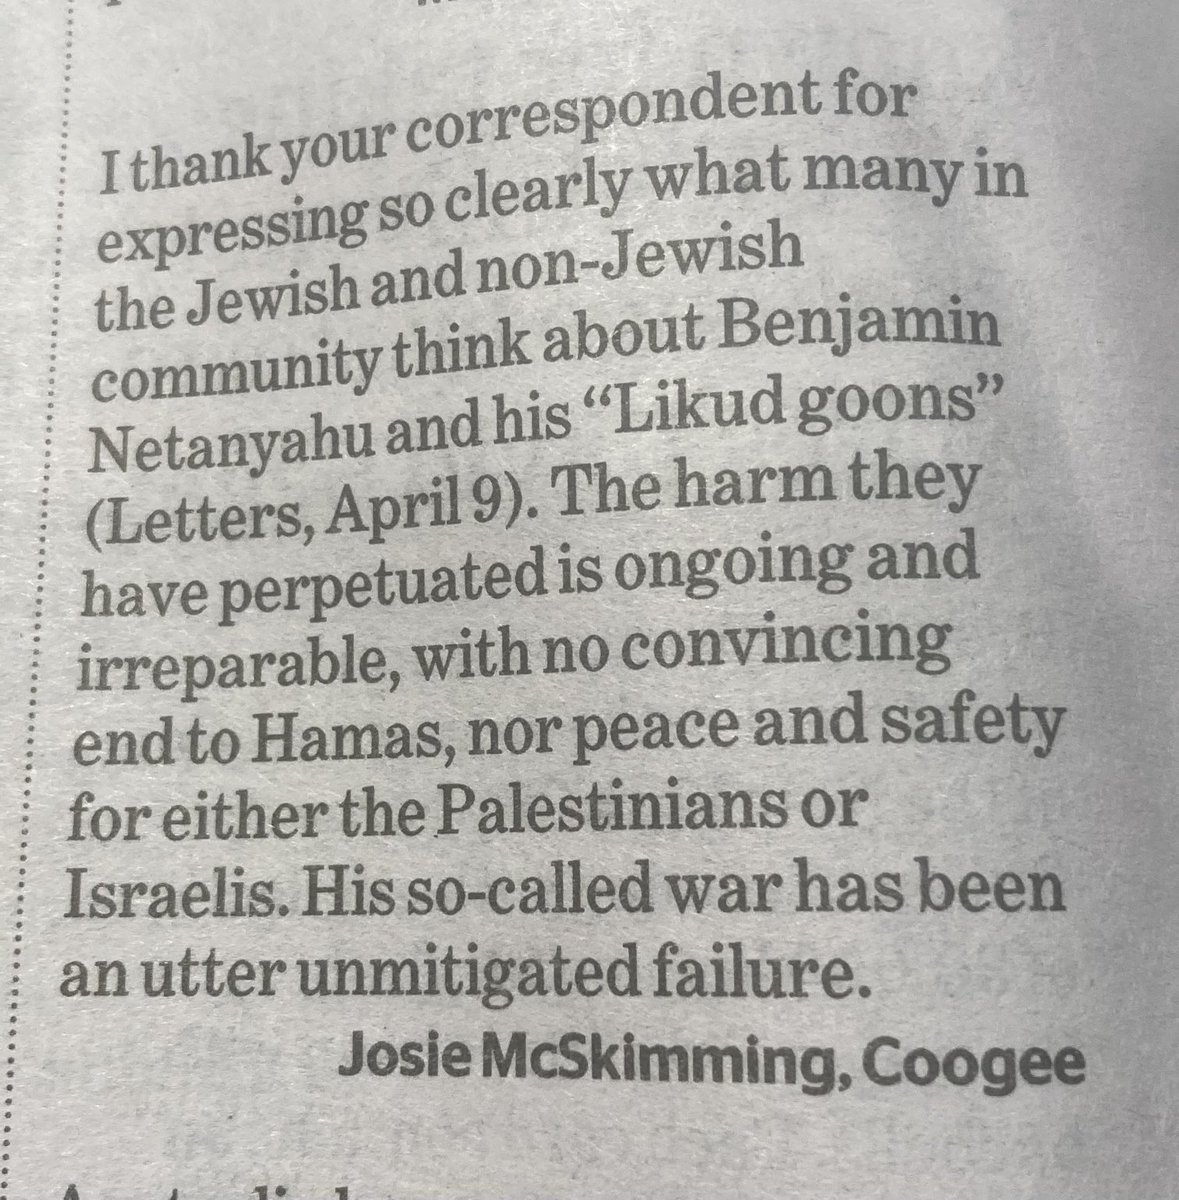 For what it’s worth, my letter to @smh this morning. I’m relieved that Penny Wong has taken the steps she has taken, & opened up the debate about recognition of the Palestinian state. For the sake of peace & stability for both Palestinians & Israelis.